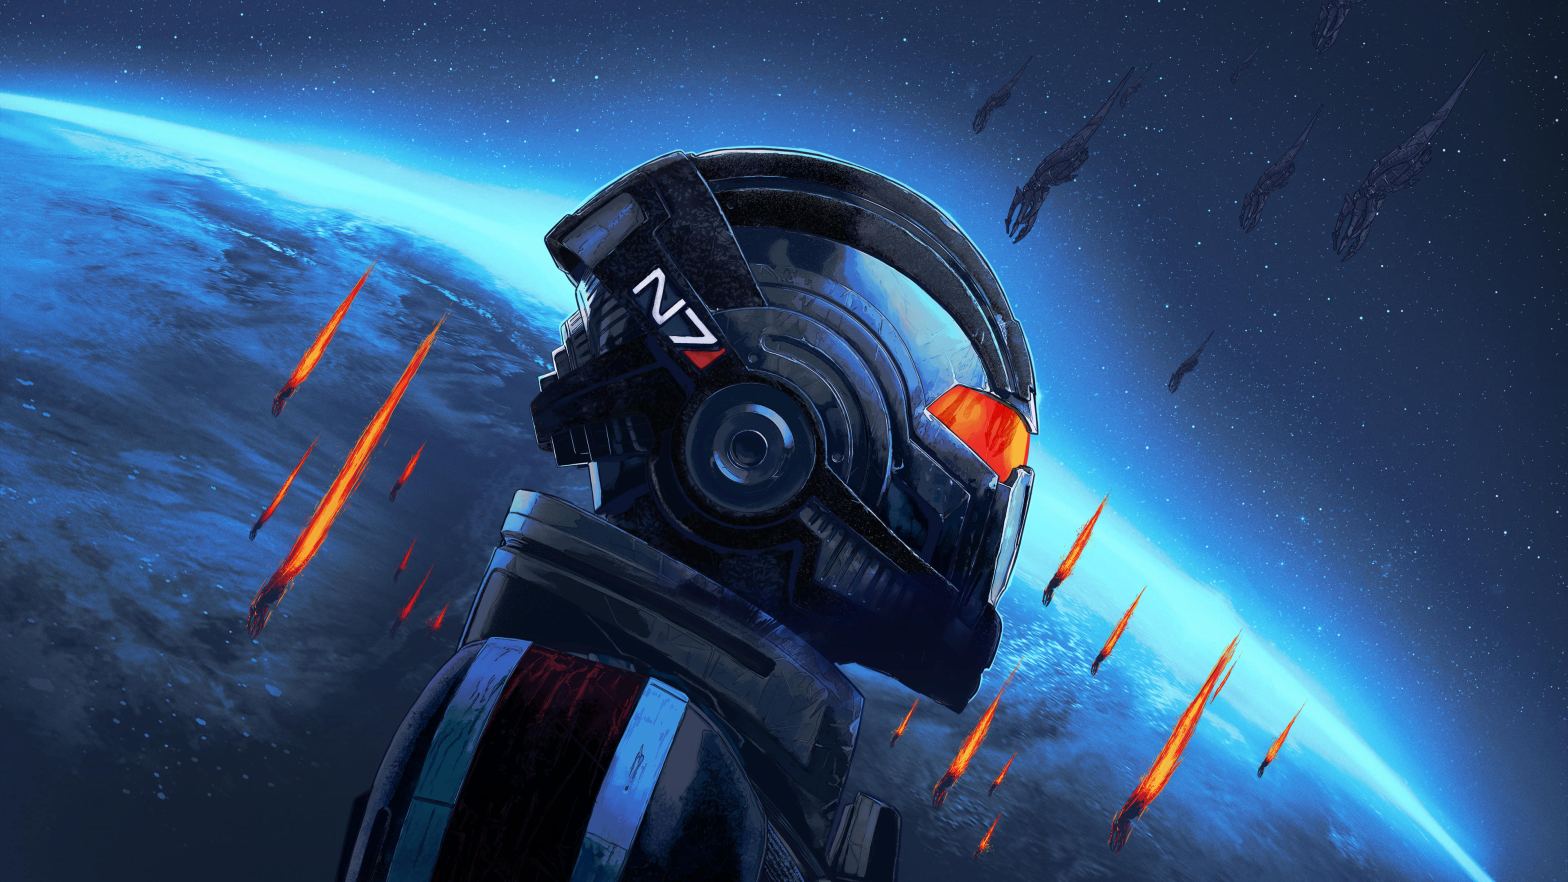 The shadow of Commander Shepard looms large over the idea of a Mass Effect TV series. (Image: BioWare/EA)